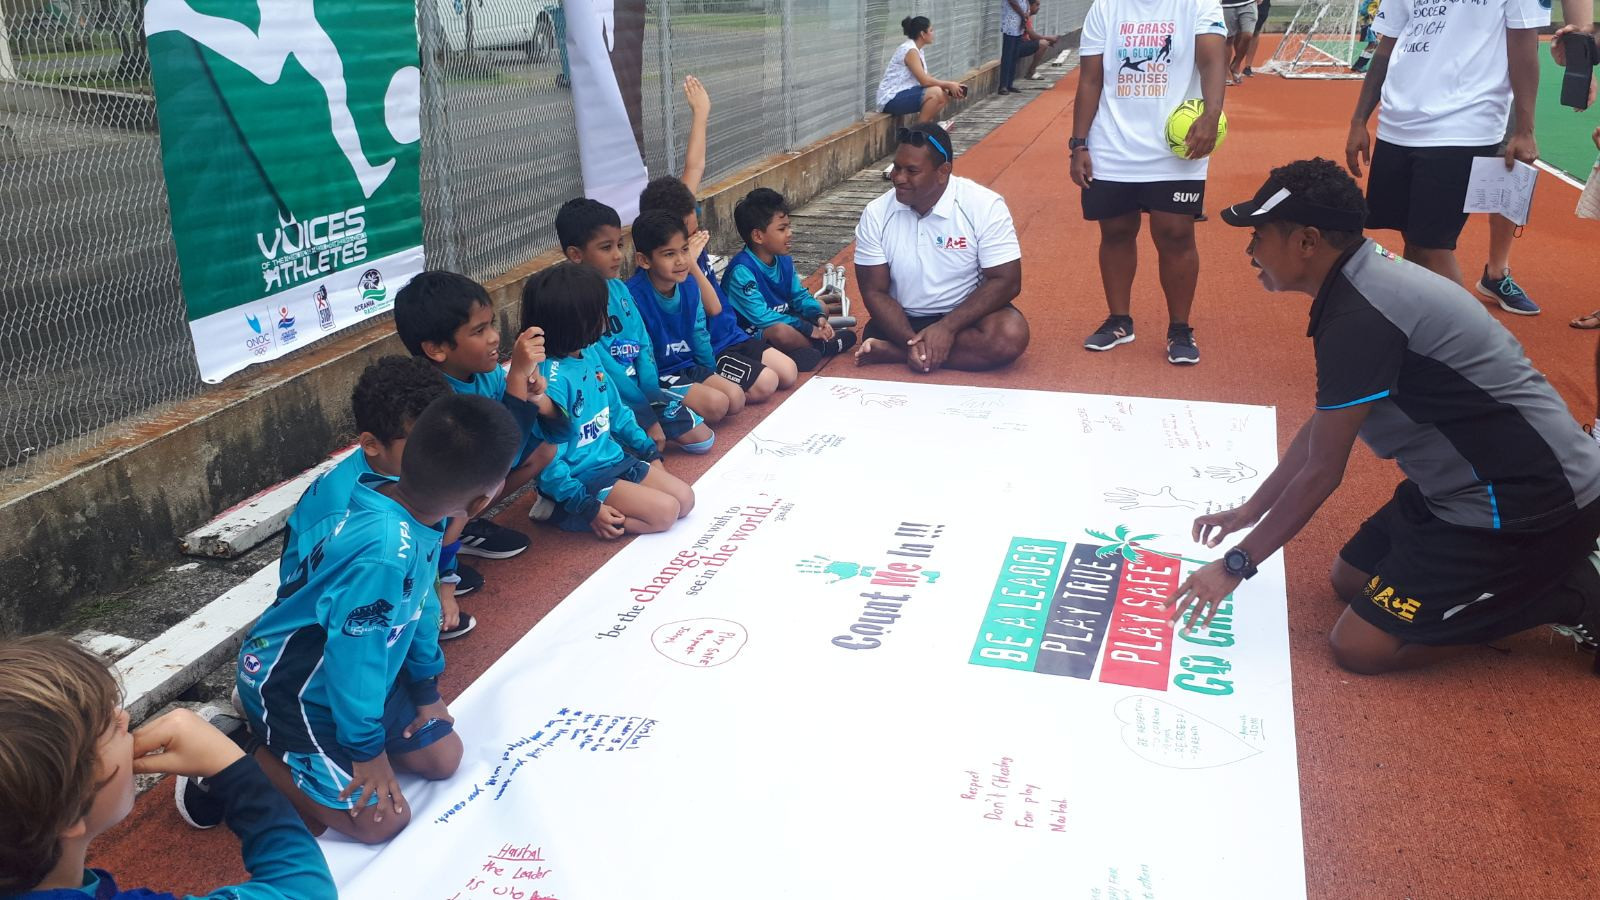 FASANOC VOA champions met with young footballers to teach them leadership and sportsmanship ©FASANOC